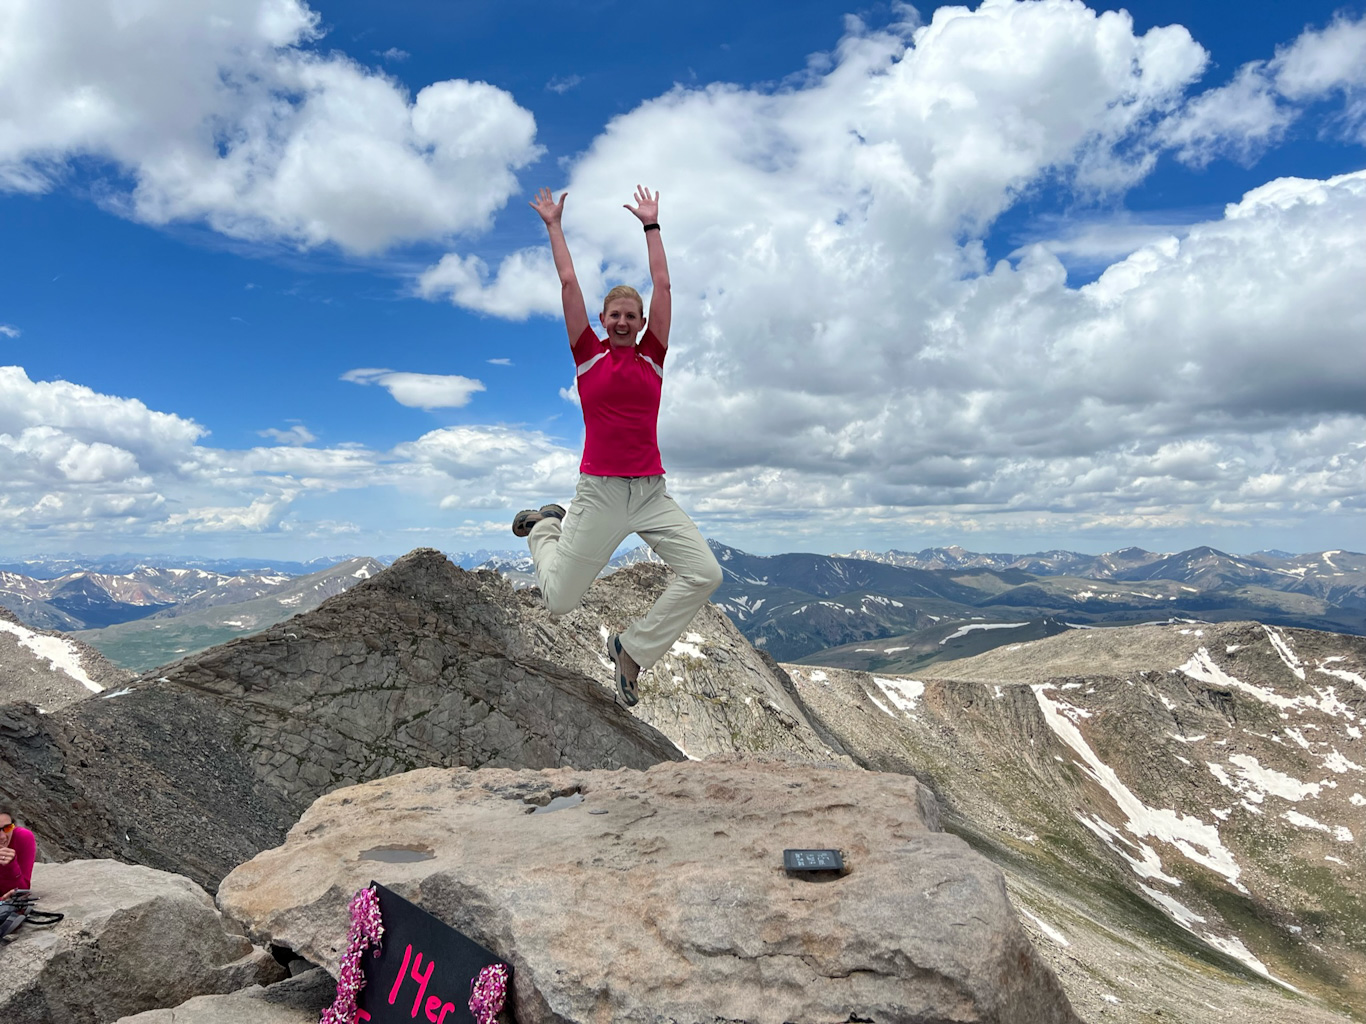 The elevation of Mount Evans is 14,265-feet, Beth added a few more 